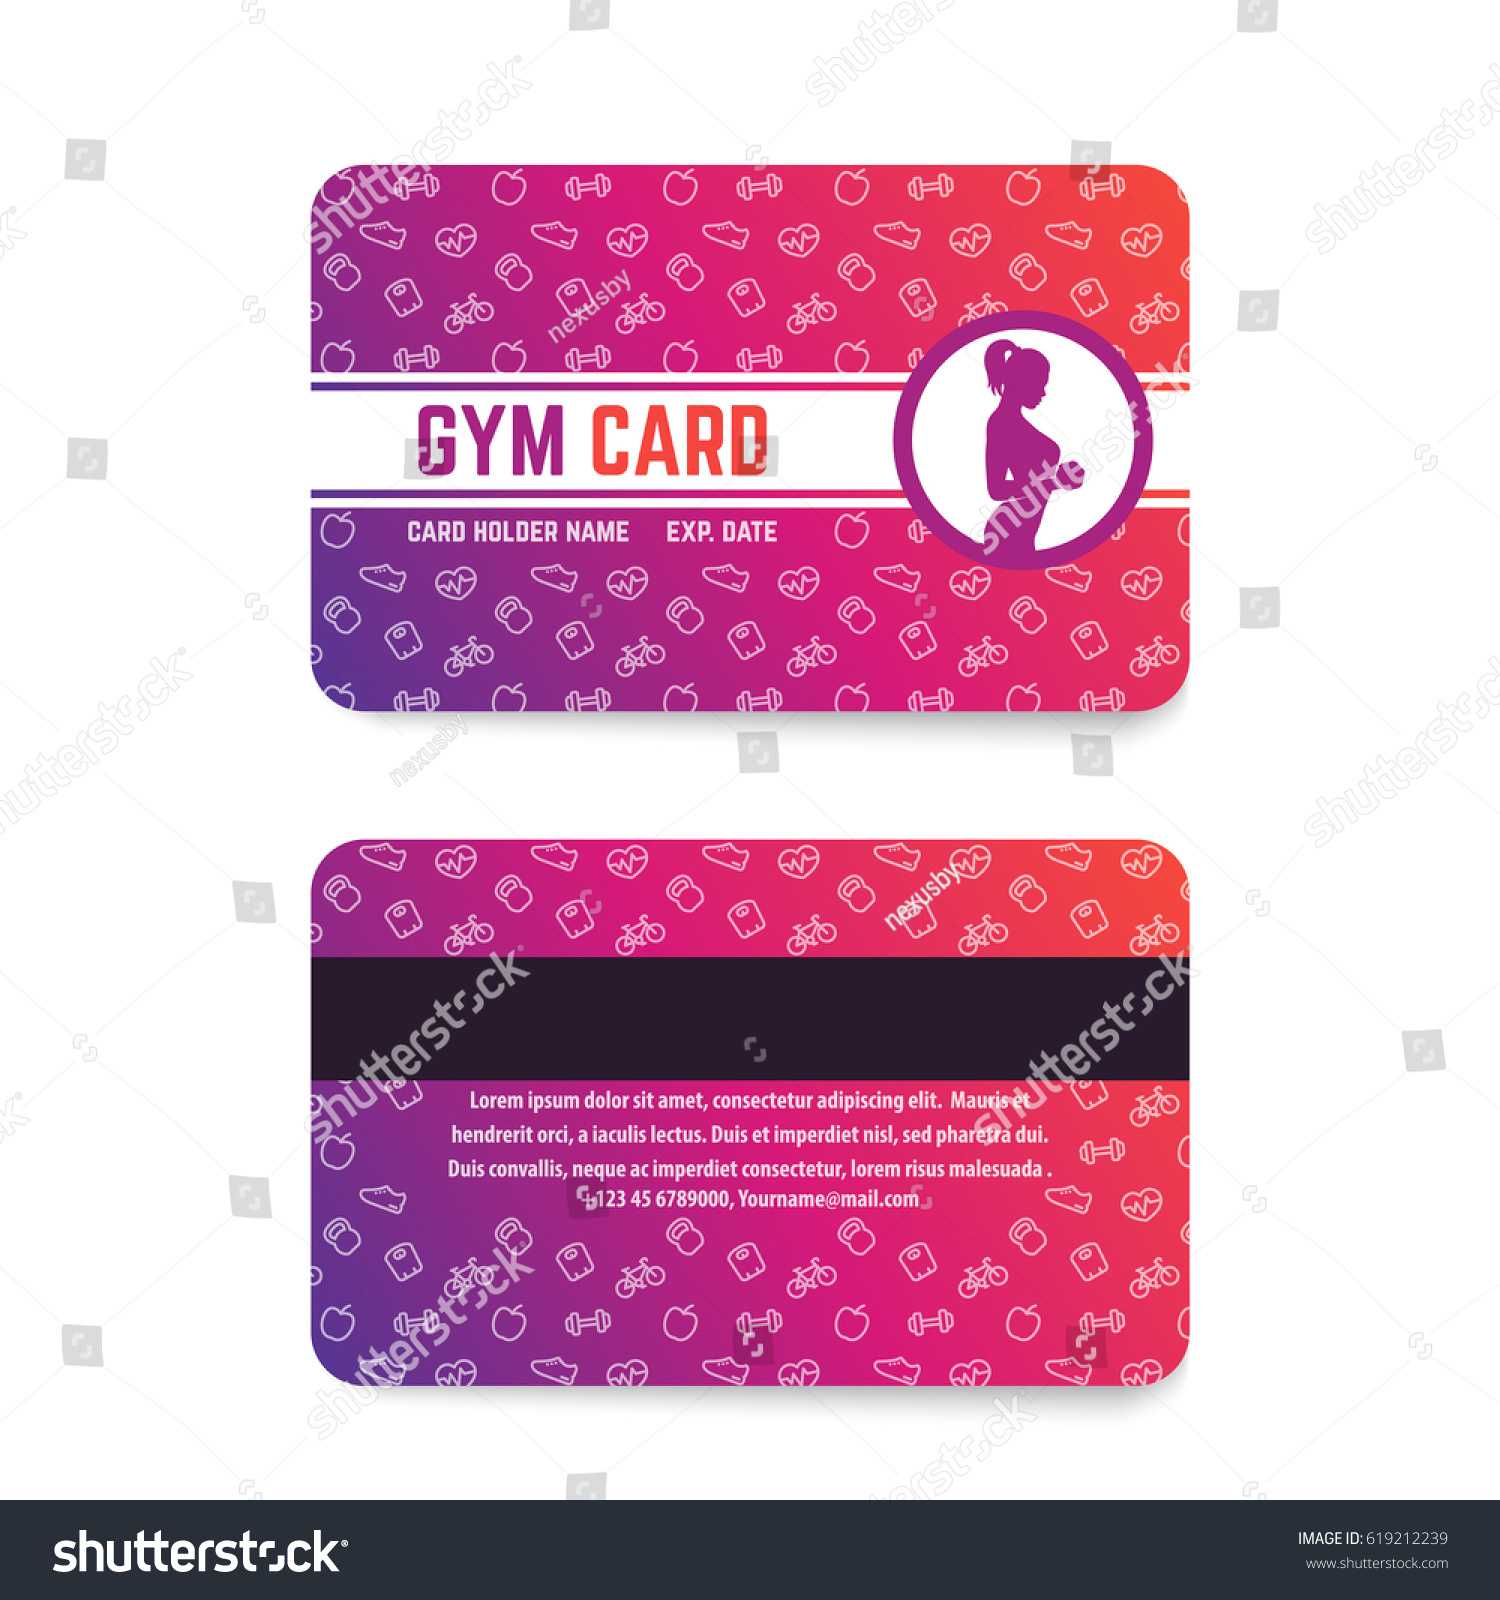 Fitness Club Gym Card Template Stock Vector (Royalty Free With Regard To Gym Membership Card Template